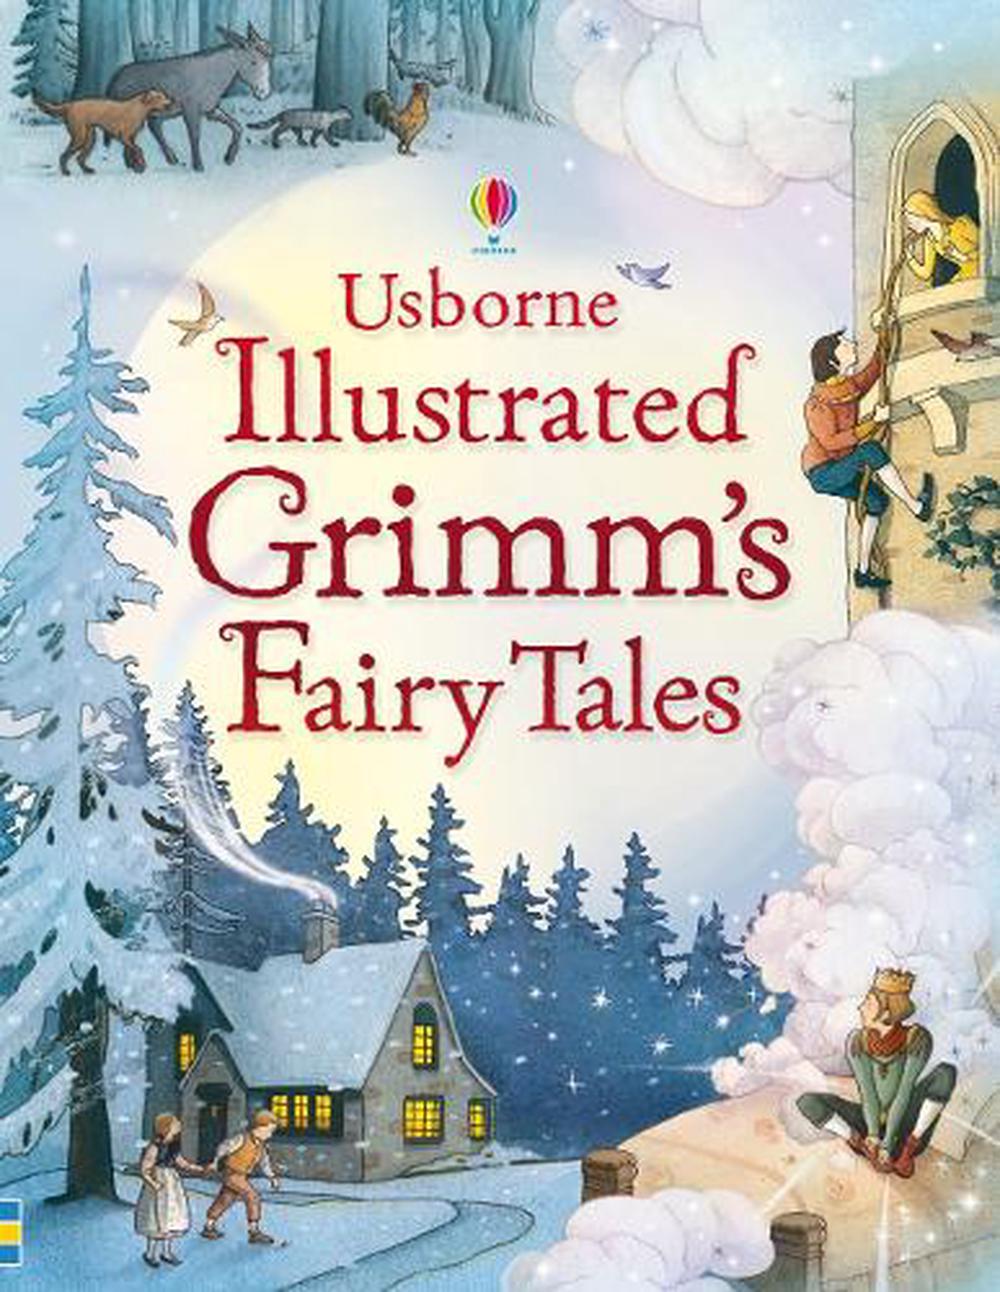 research on fairy tales